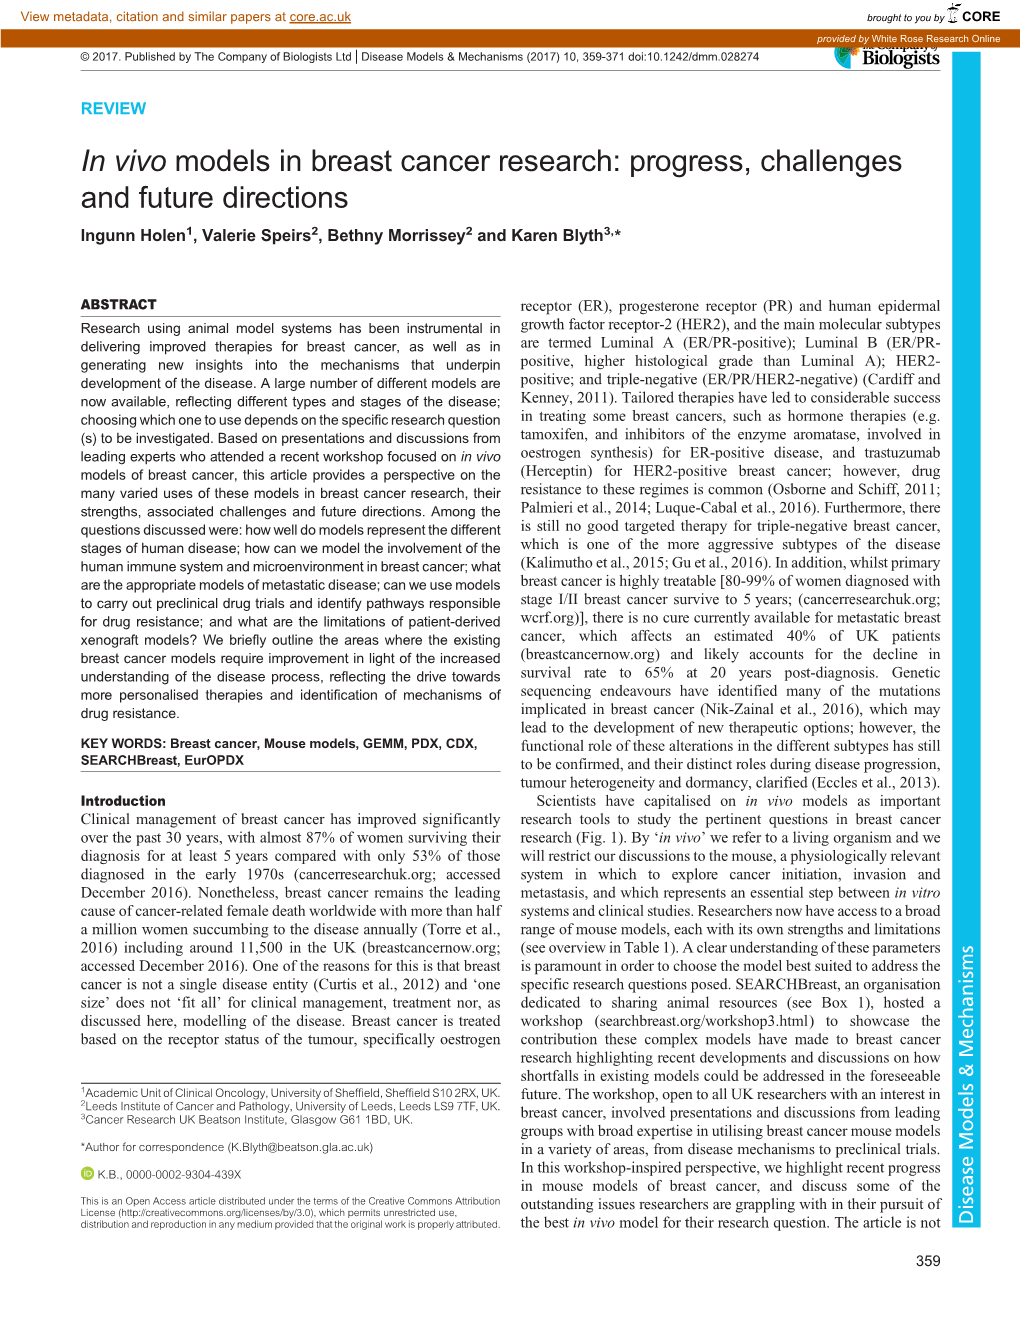 In Vivo Models in Breast Cancer Research: Progress, Challenges and Future Directions Ingunn Holen1, Valerie Speirs2, Bethny Morrissey2 and Karen Blyth3,*